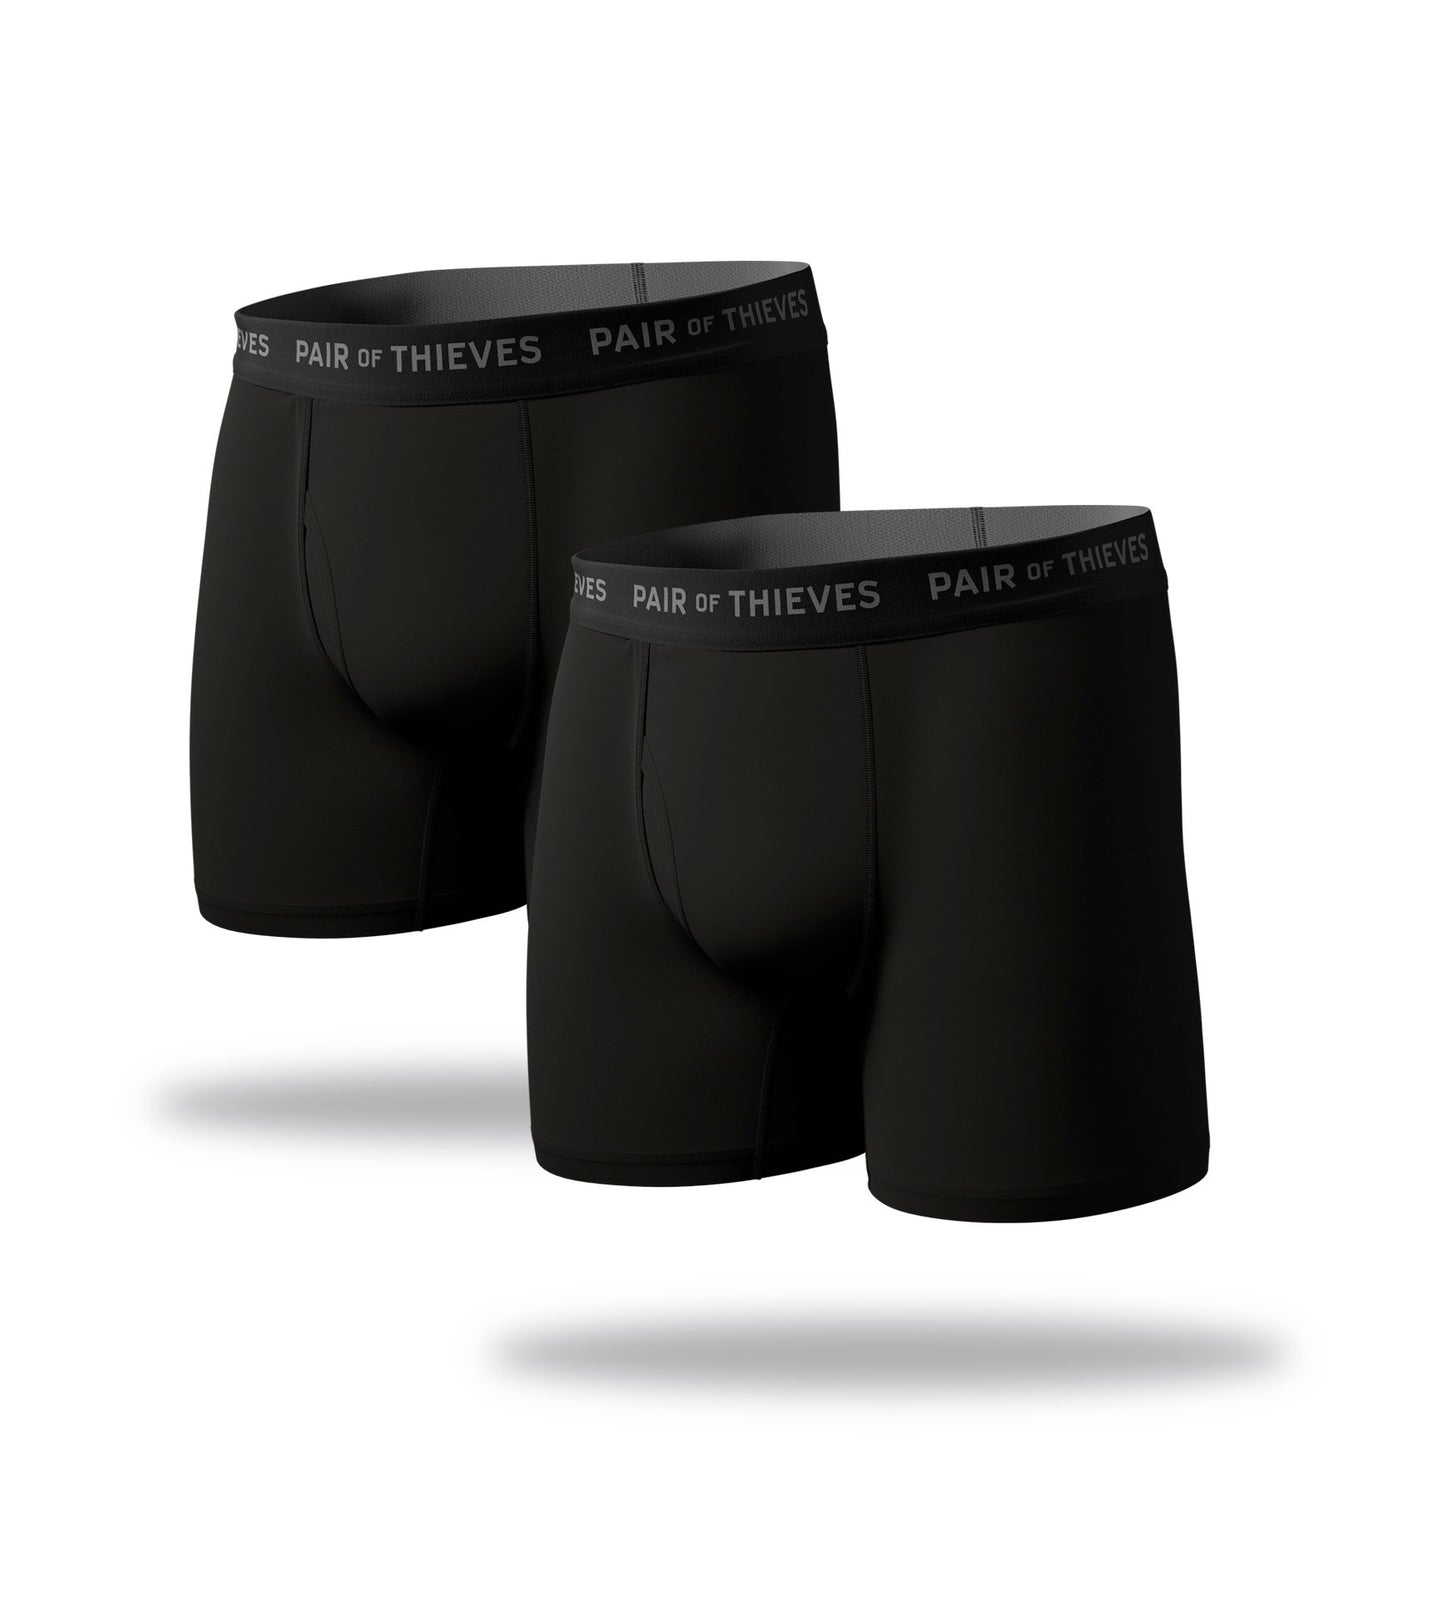 Pair Of Thieves 2 Pack SuperSoft Stretch Boxer Briefs - Men's